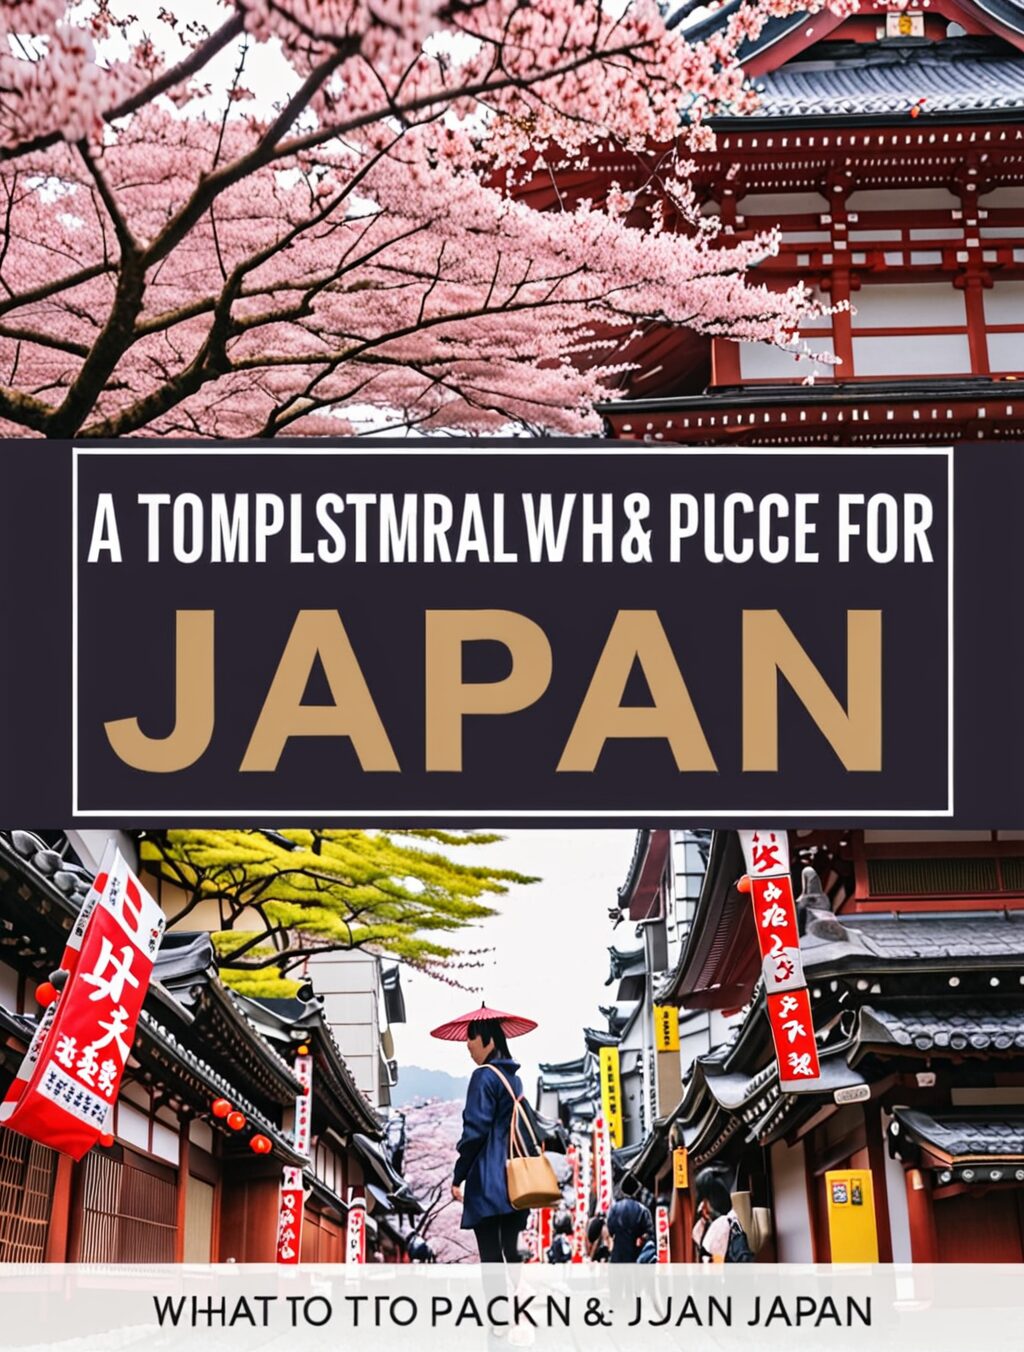 what to pack for a trip to japan in march